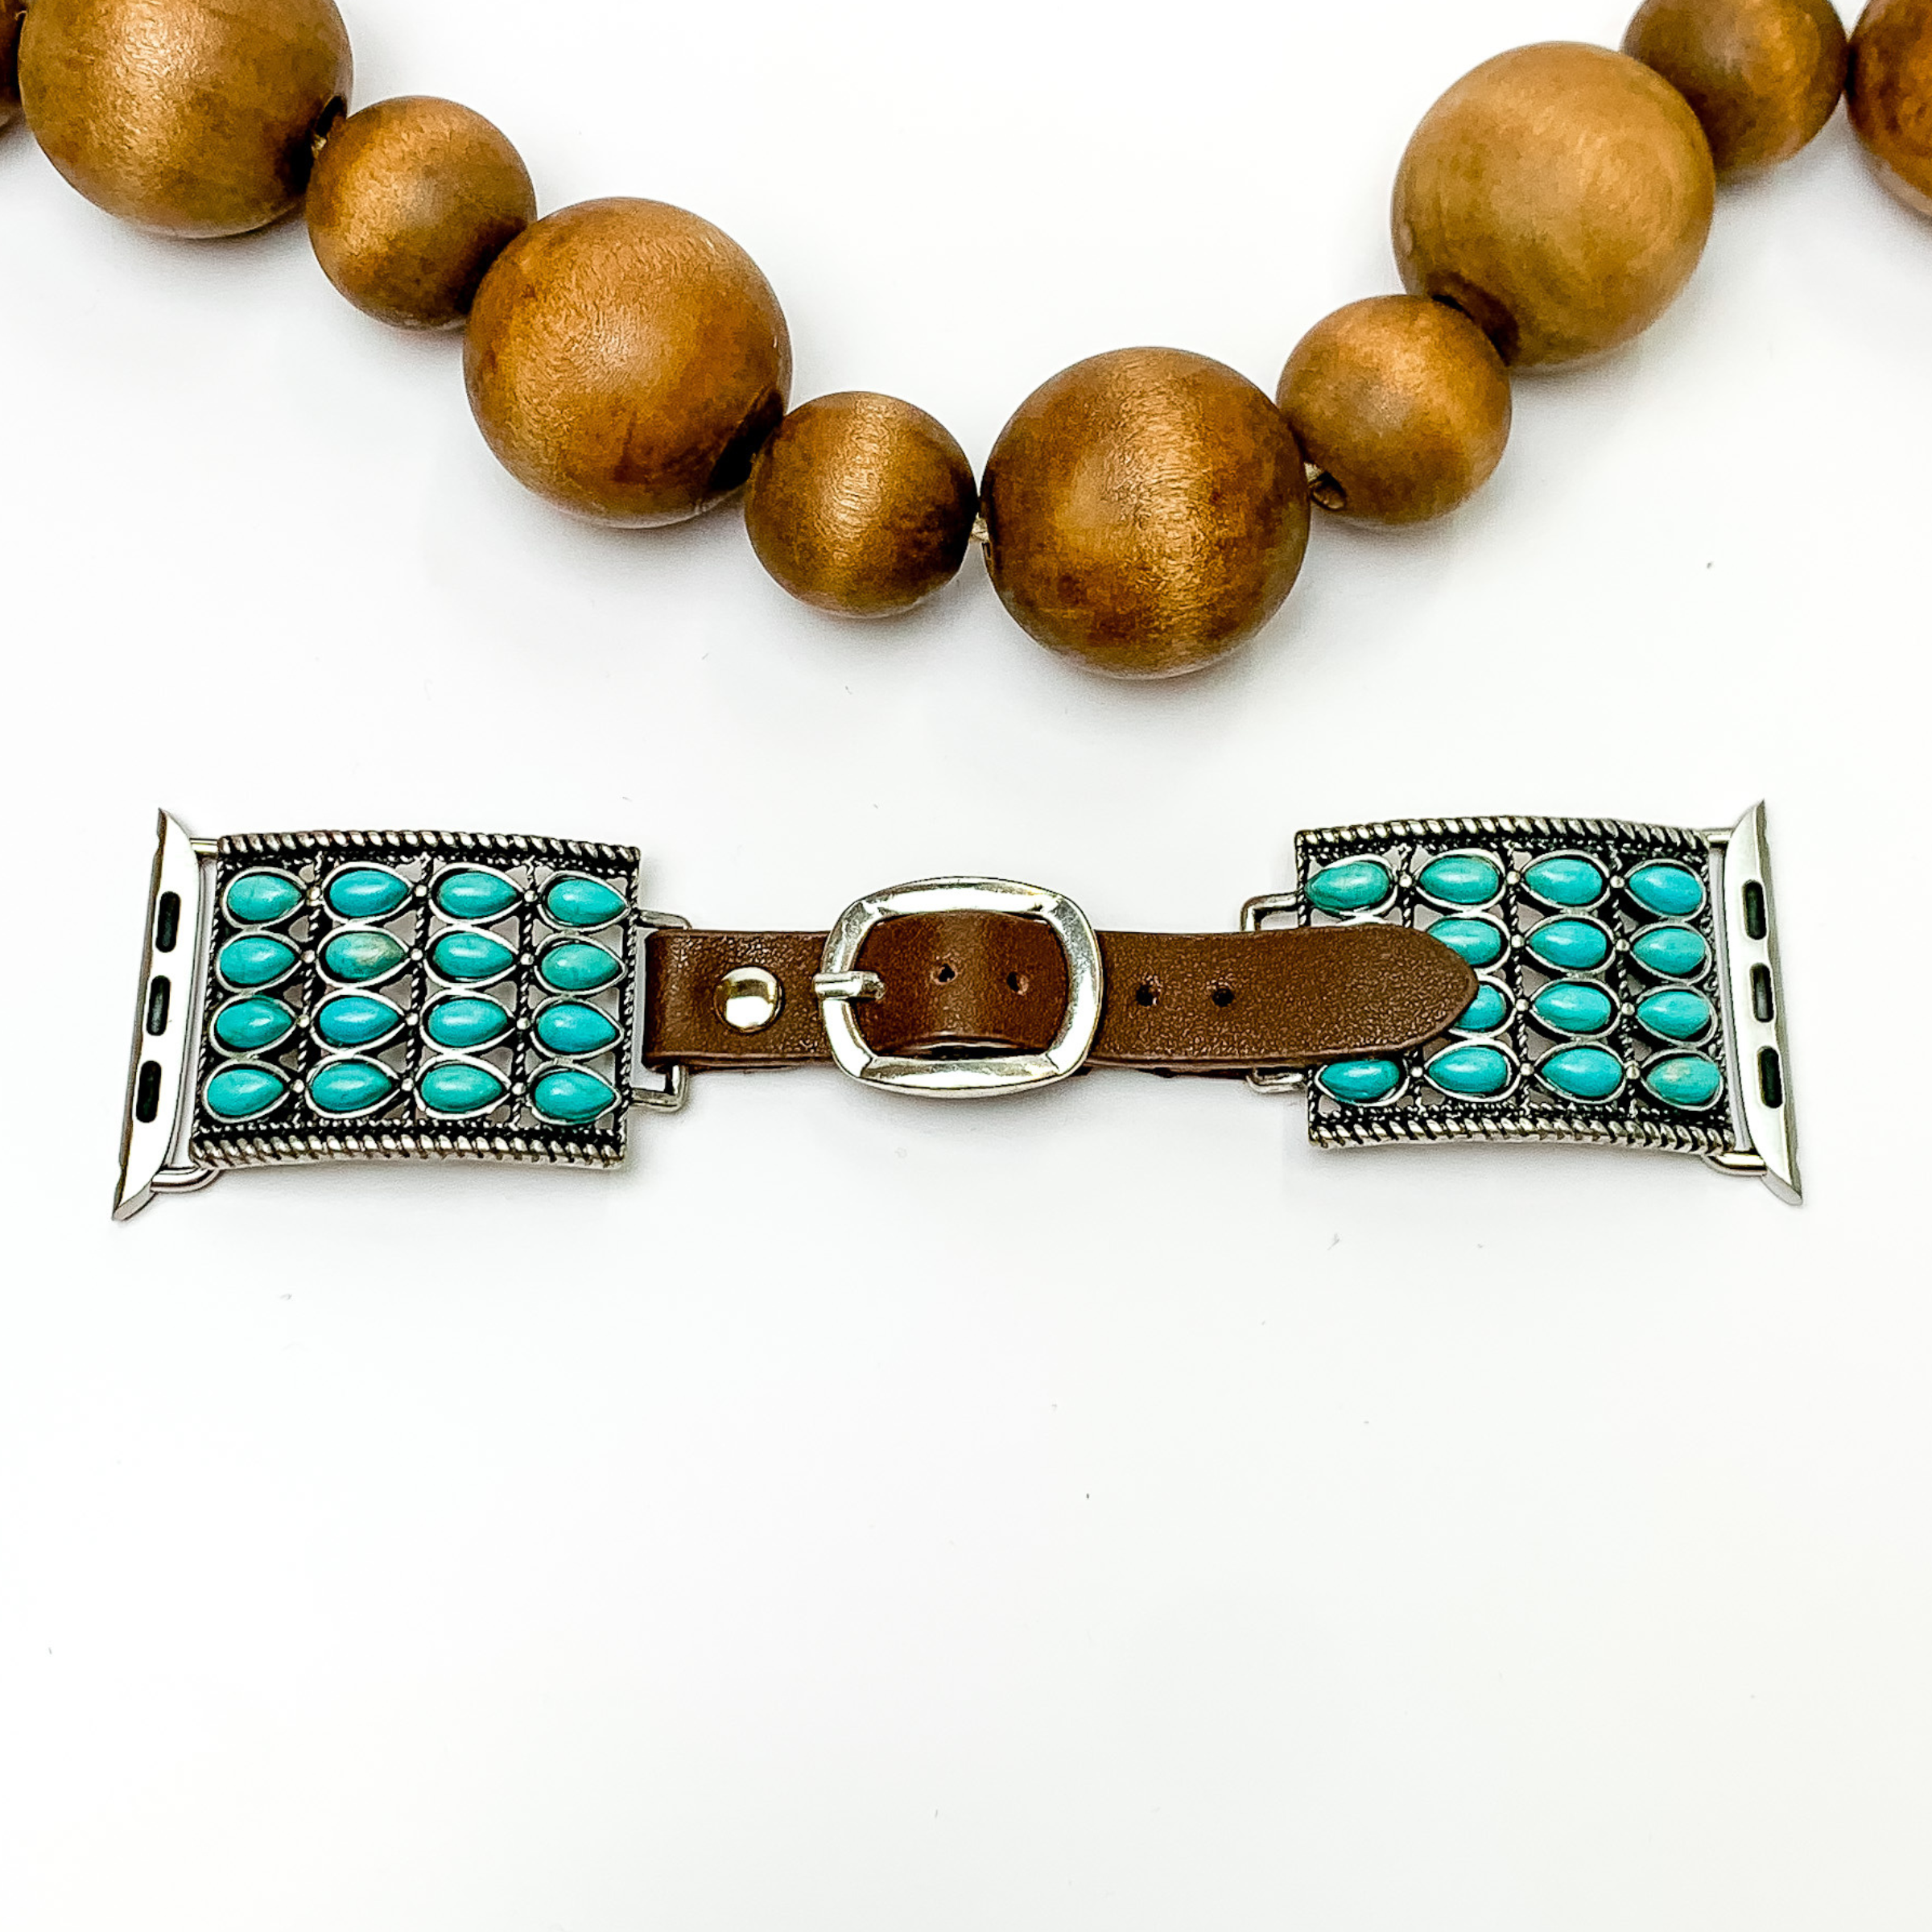 Dark Brown watch band with silver, engraved rectangle pendants and Apple watch band acessories. The pendants include rows of 16 turquoise stones. This watch band is pictured on a white background with brown beads above the band. 